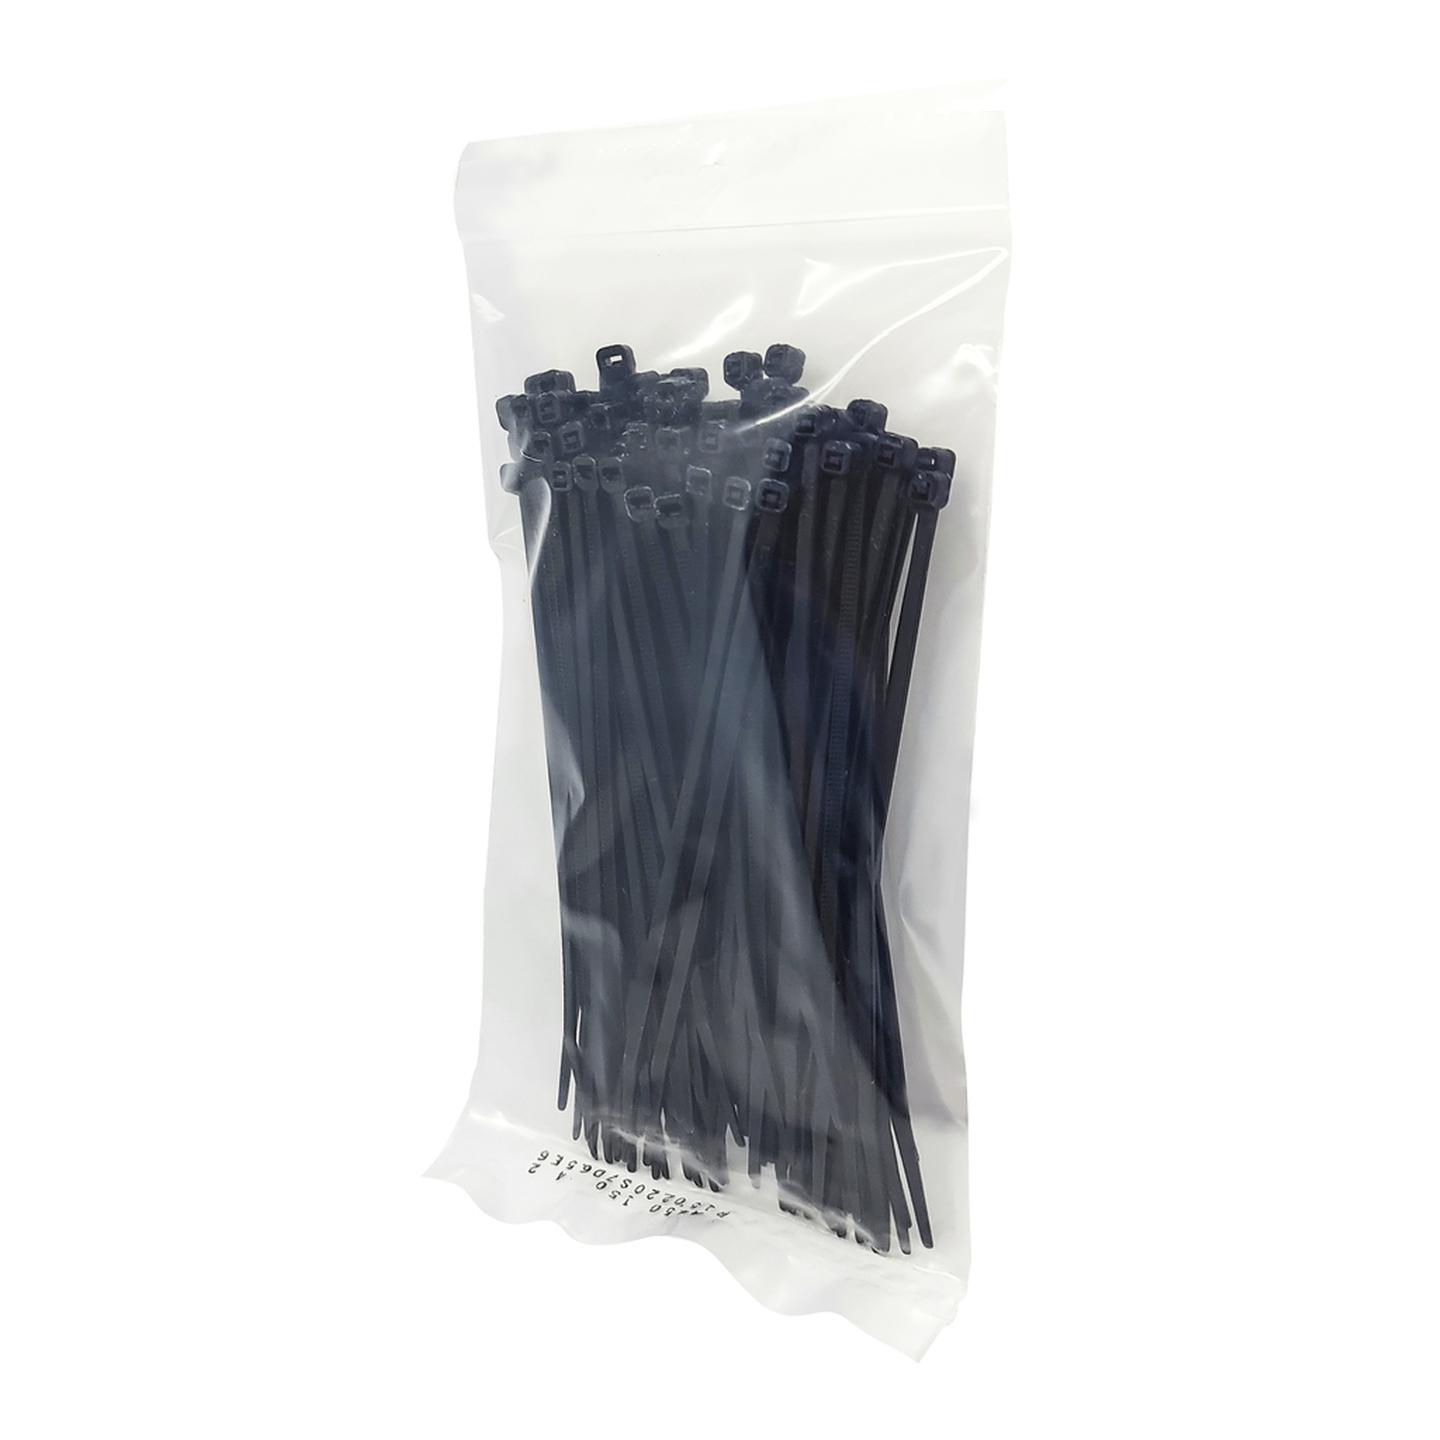 100mm Black Cable Ties - Pack of 100